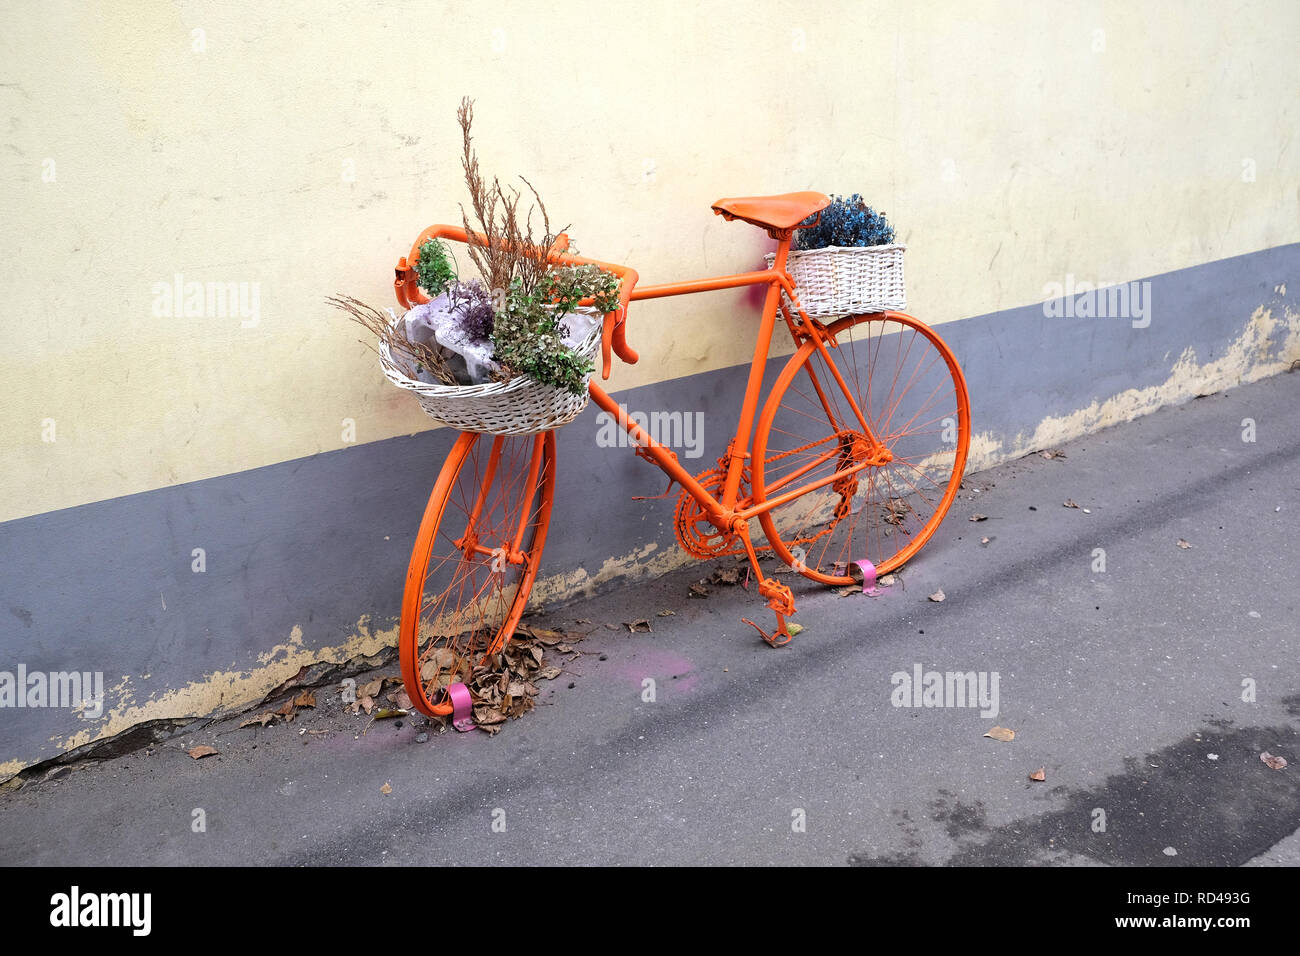 Retro style sport bike color orange with flower baskets as decoration outdoor near the wall side view Stock Photo